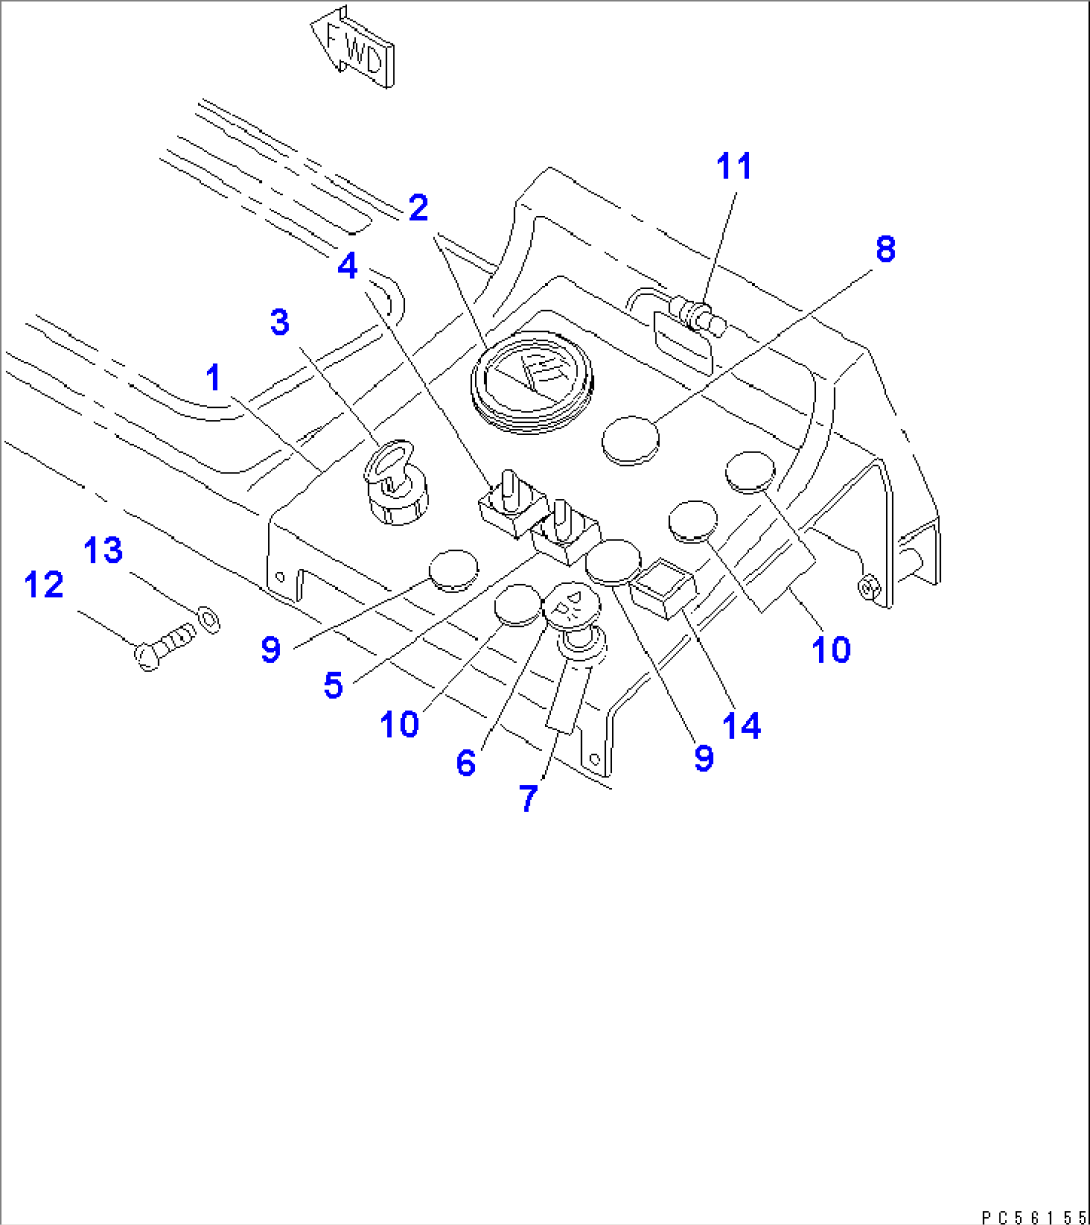 INSTRUMENT PANEL (WITH BEACON LAMP)(#1574-)